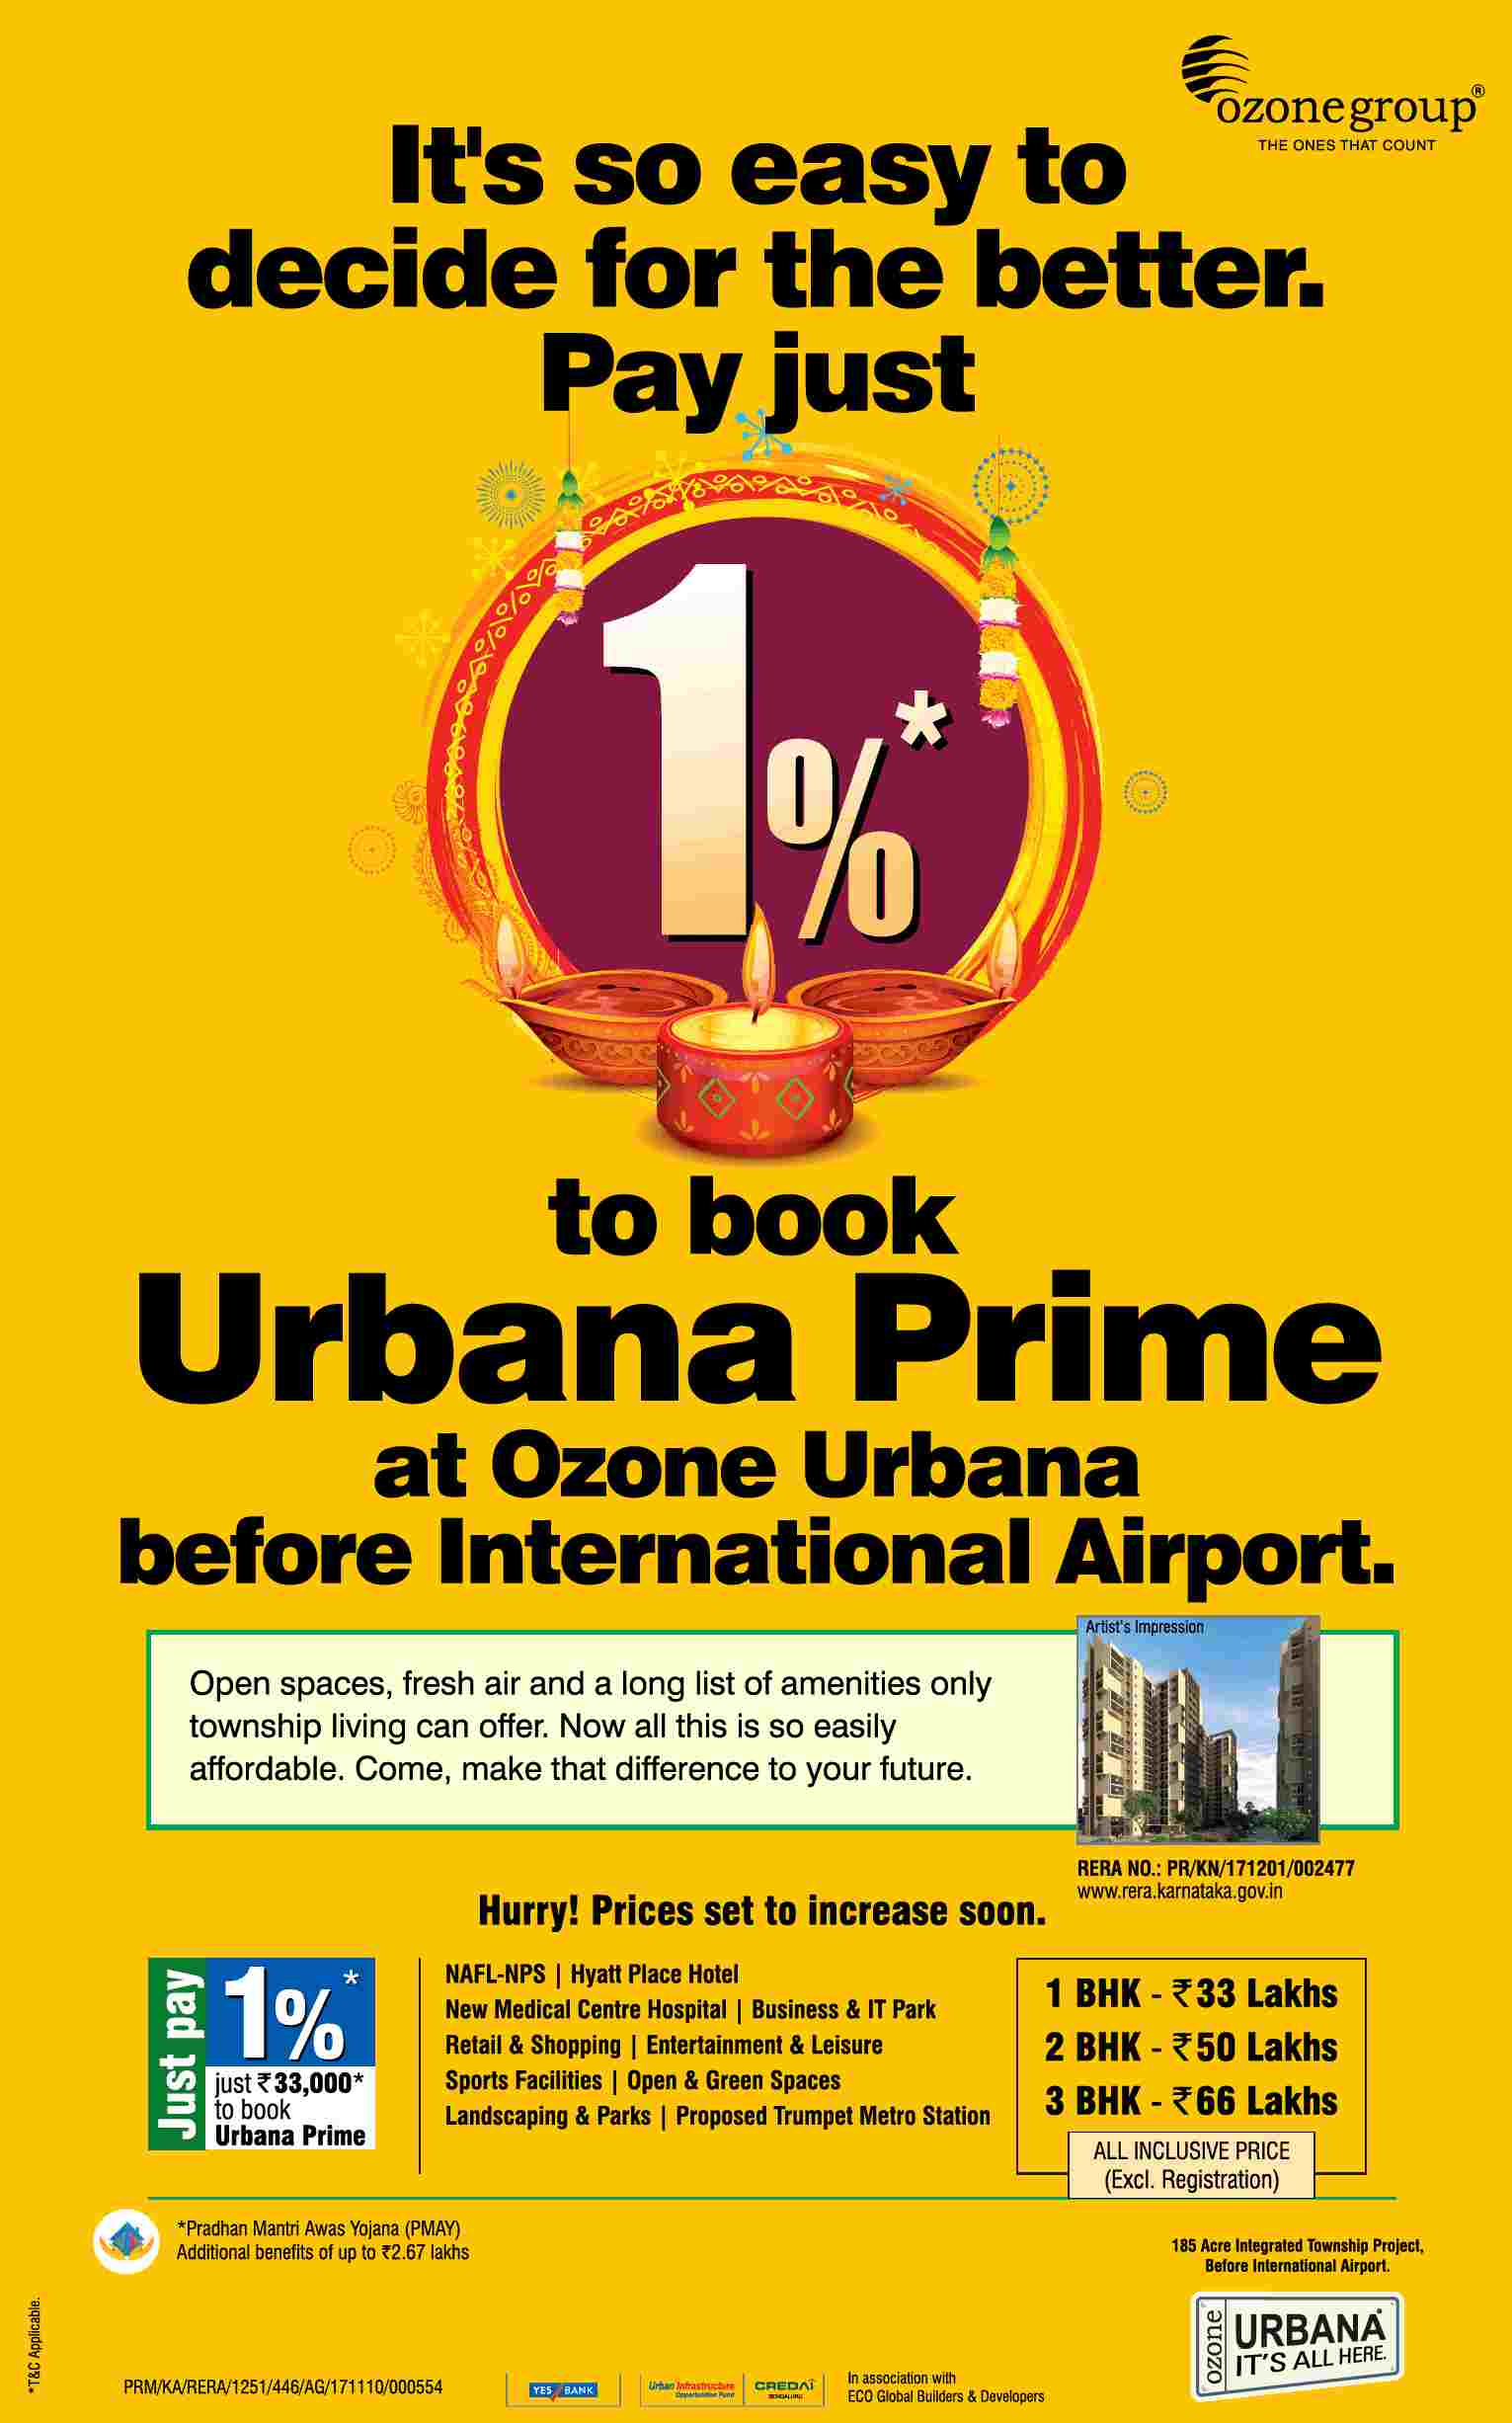 Just pay 1% to book your home at Ozone Urbana Prime in Devanahalli, Bangalore